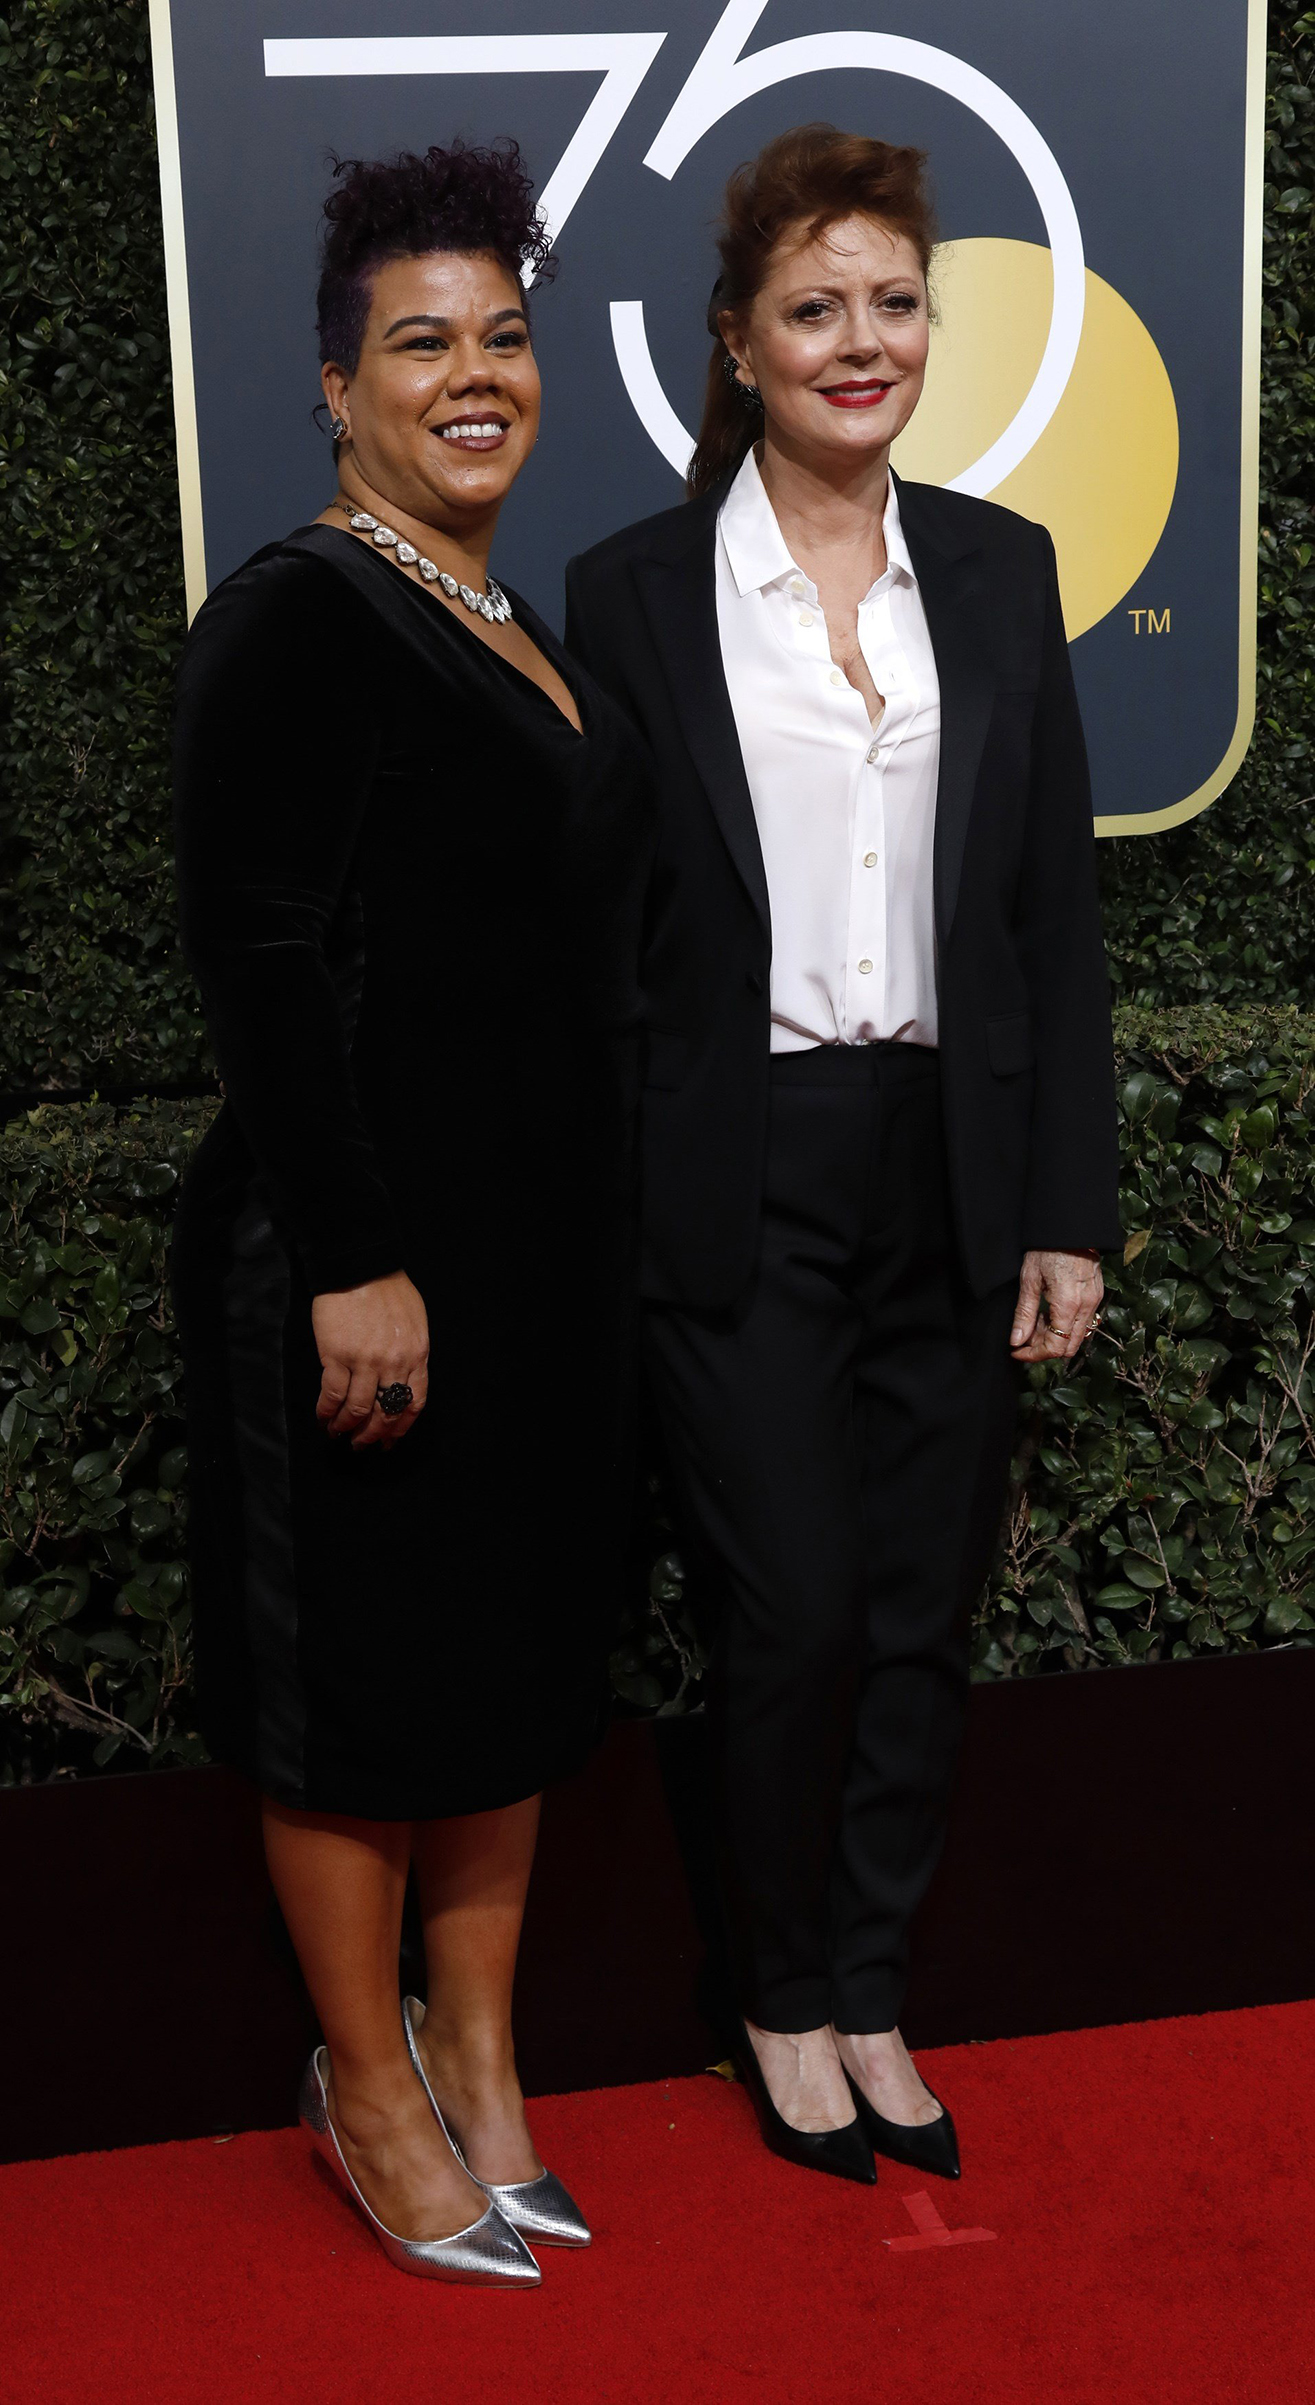 Activist Rosa Clemente and actress Susan Sarandon at the 75th annual Golden Globes, Beverly Hills, Calif, Jan. 7, 2018. (Mario Anzuoni—REUTERS)